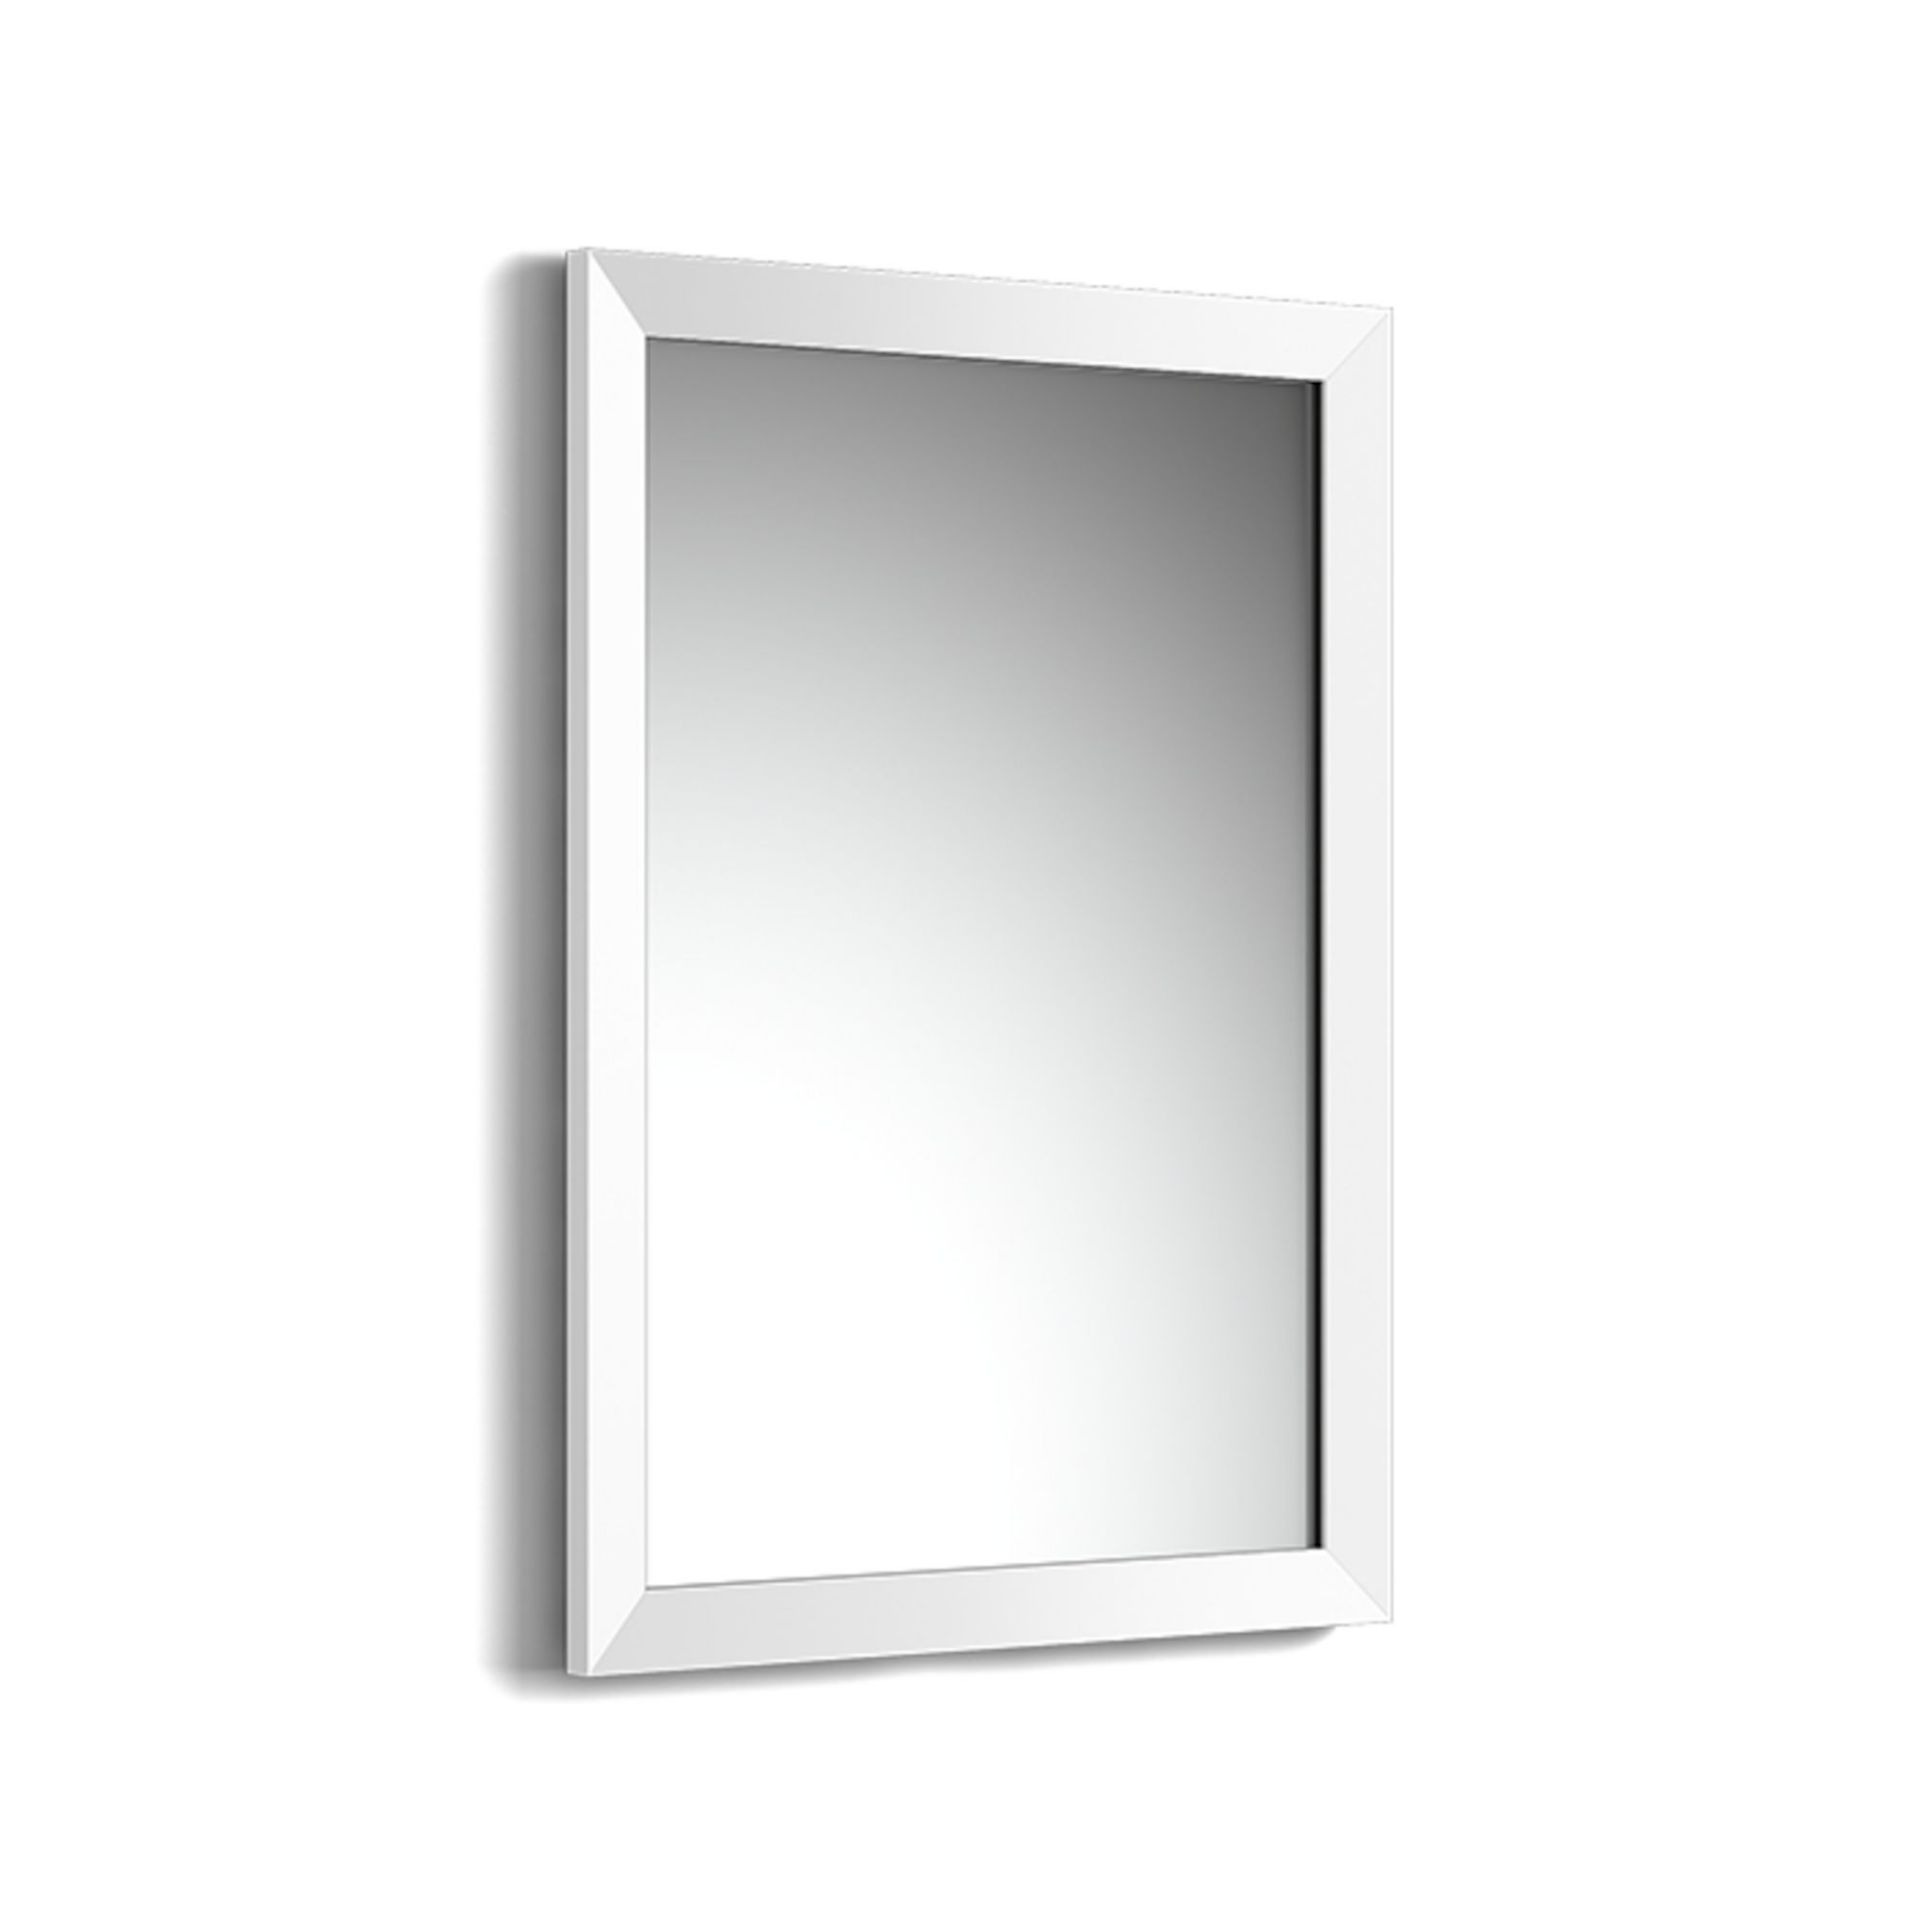 (ZL288) 500x700mm Clover Gloss White Framed Mirror. Made from eco friendly recycled plastics Water - Image 4 of 4